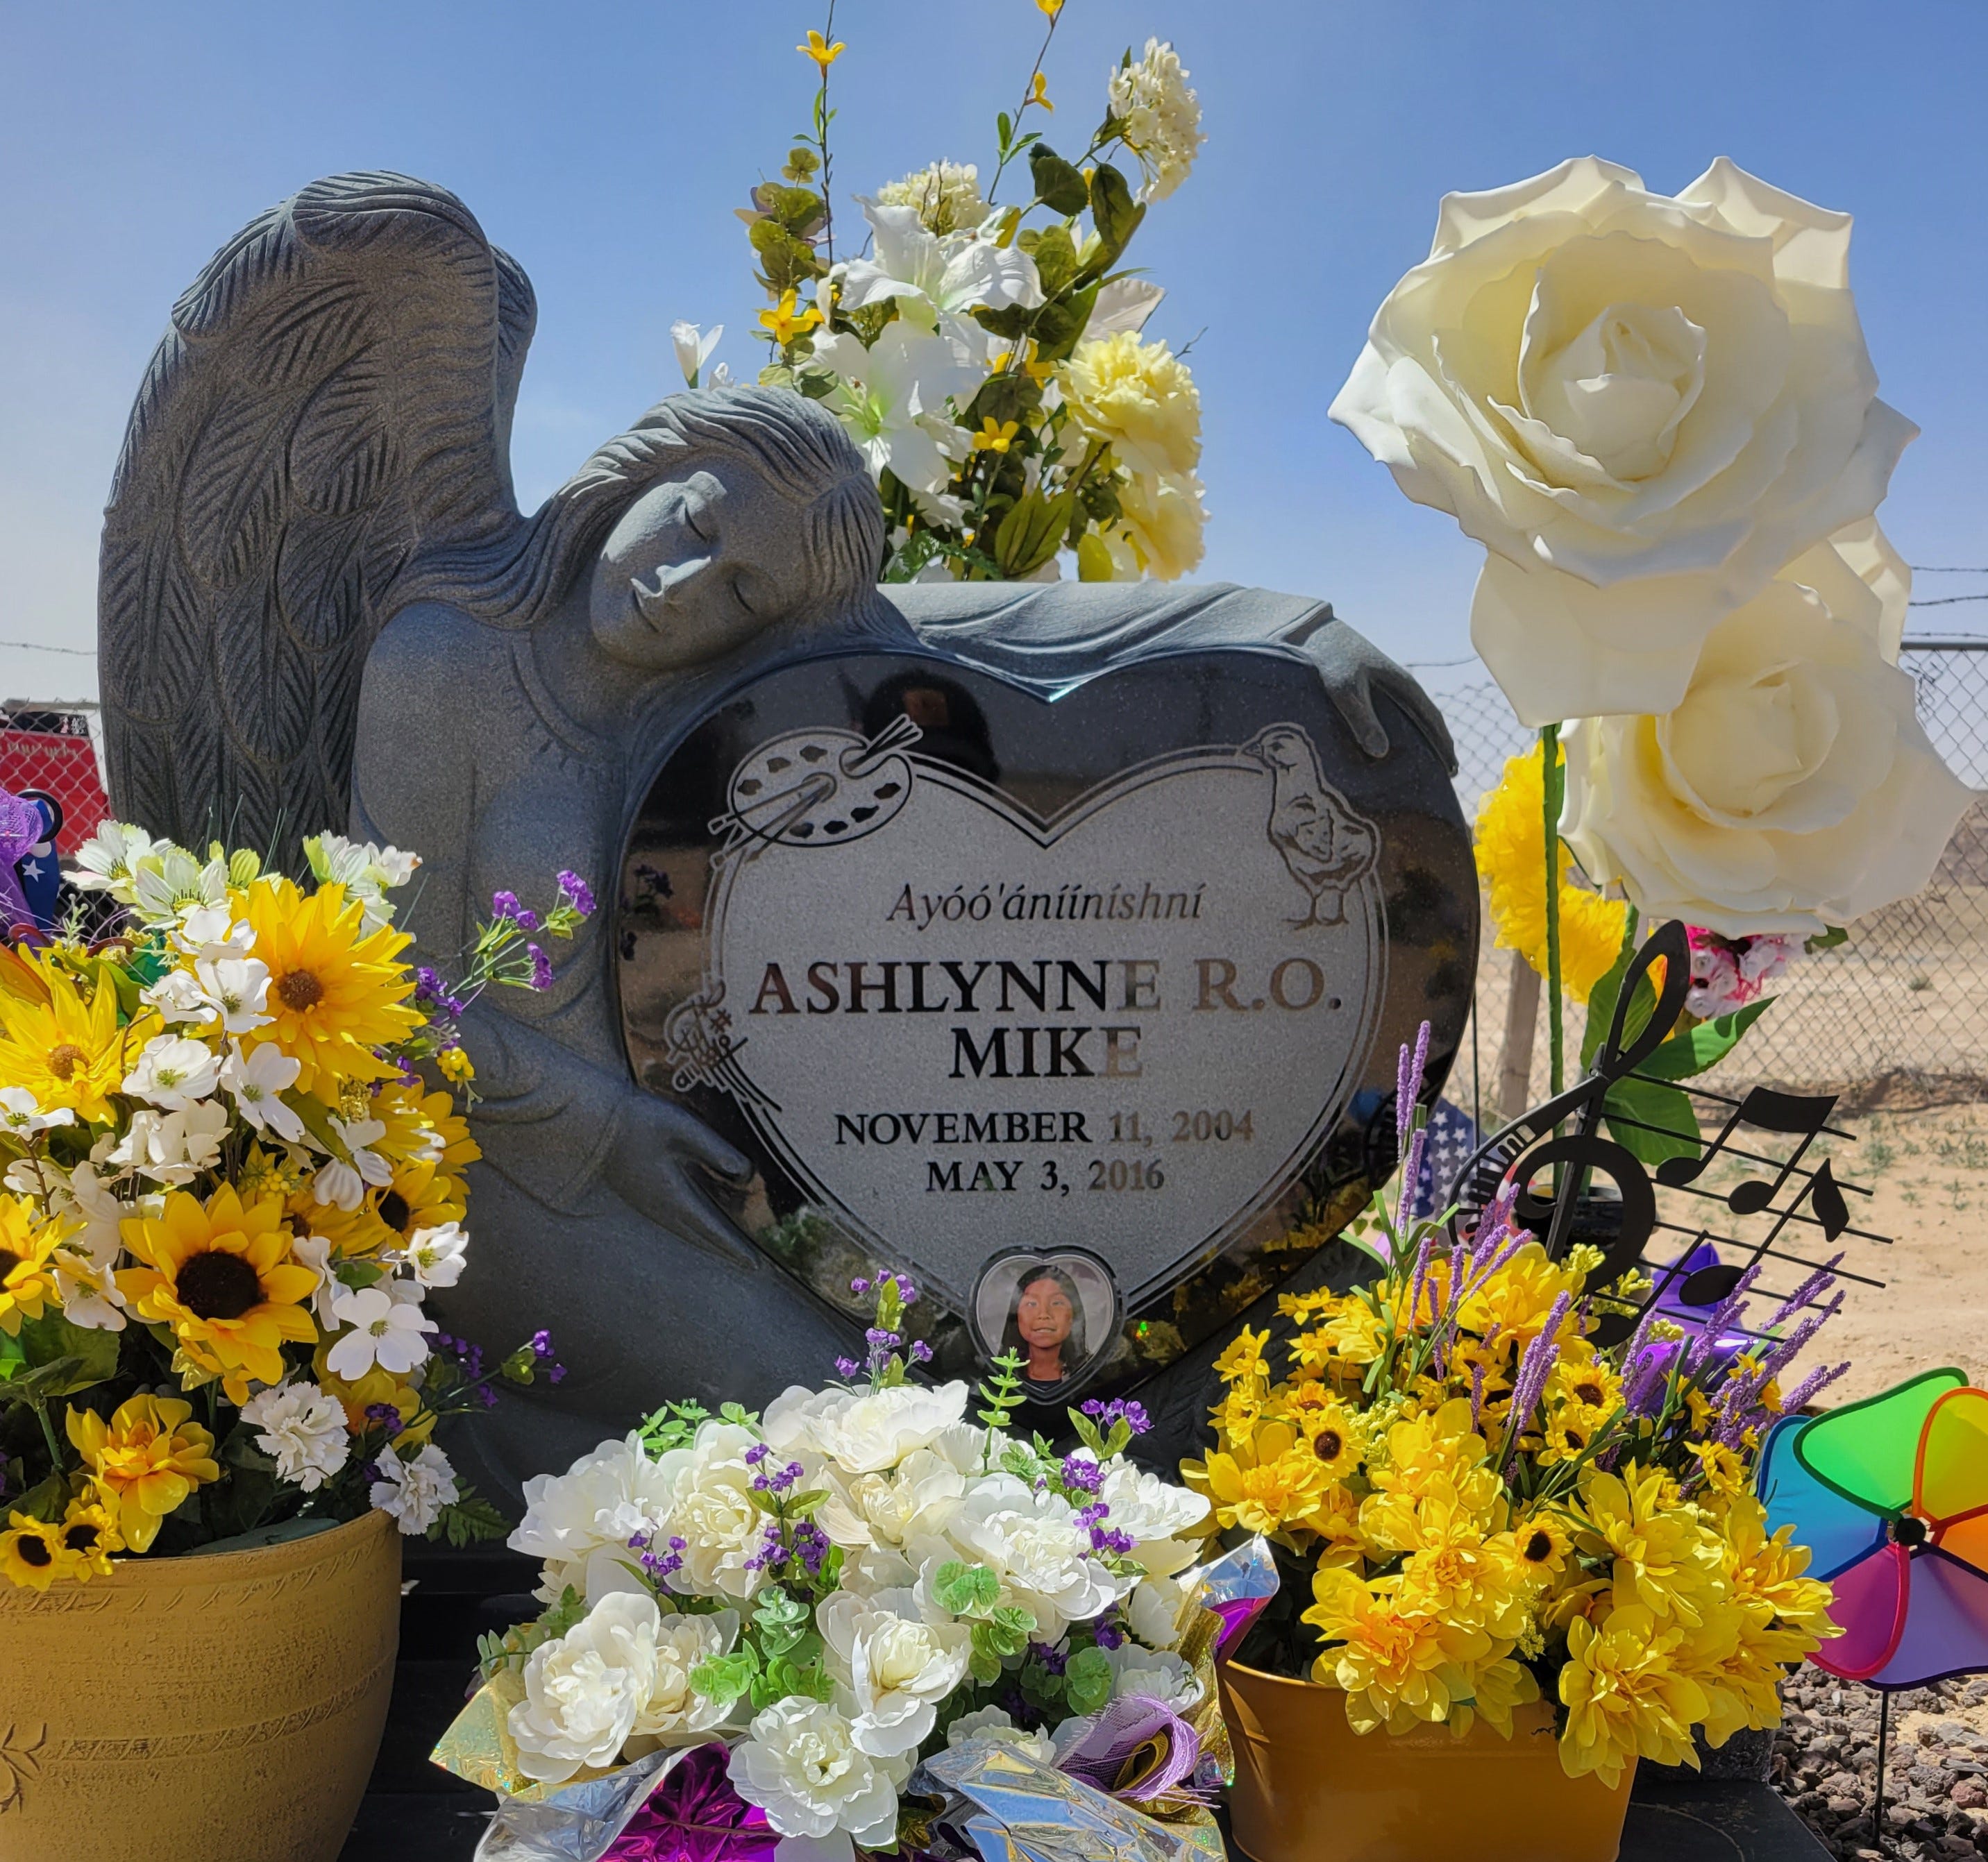 The headstone for Ashlynne Mike is pictured on May 1. A GoFundMe campaign launched by a friend of Pamela Foster, Ashlynne Mike's mother, raised funds for the gravestone, which family and friends placed on at her grave on April 28.